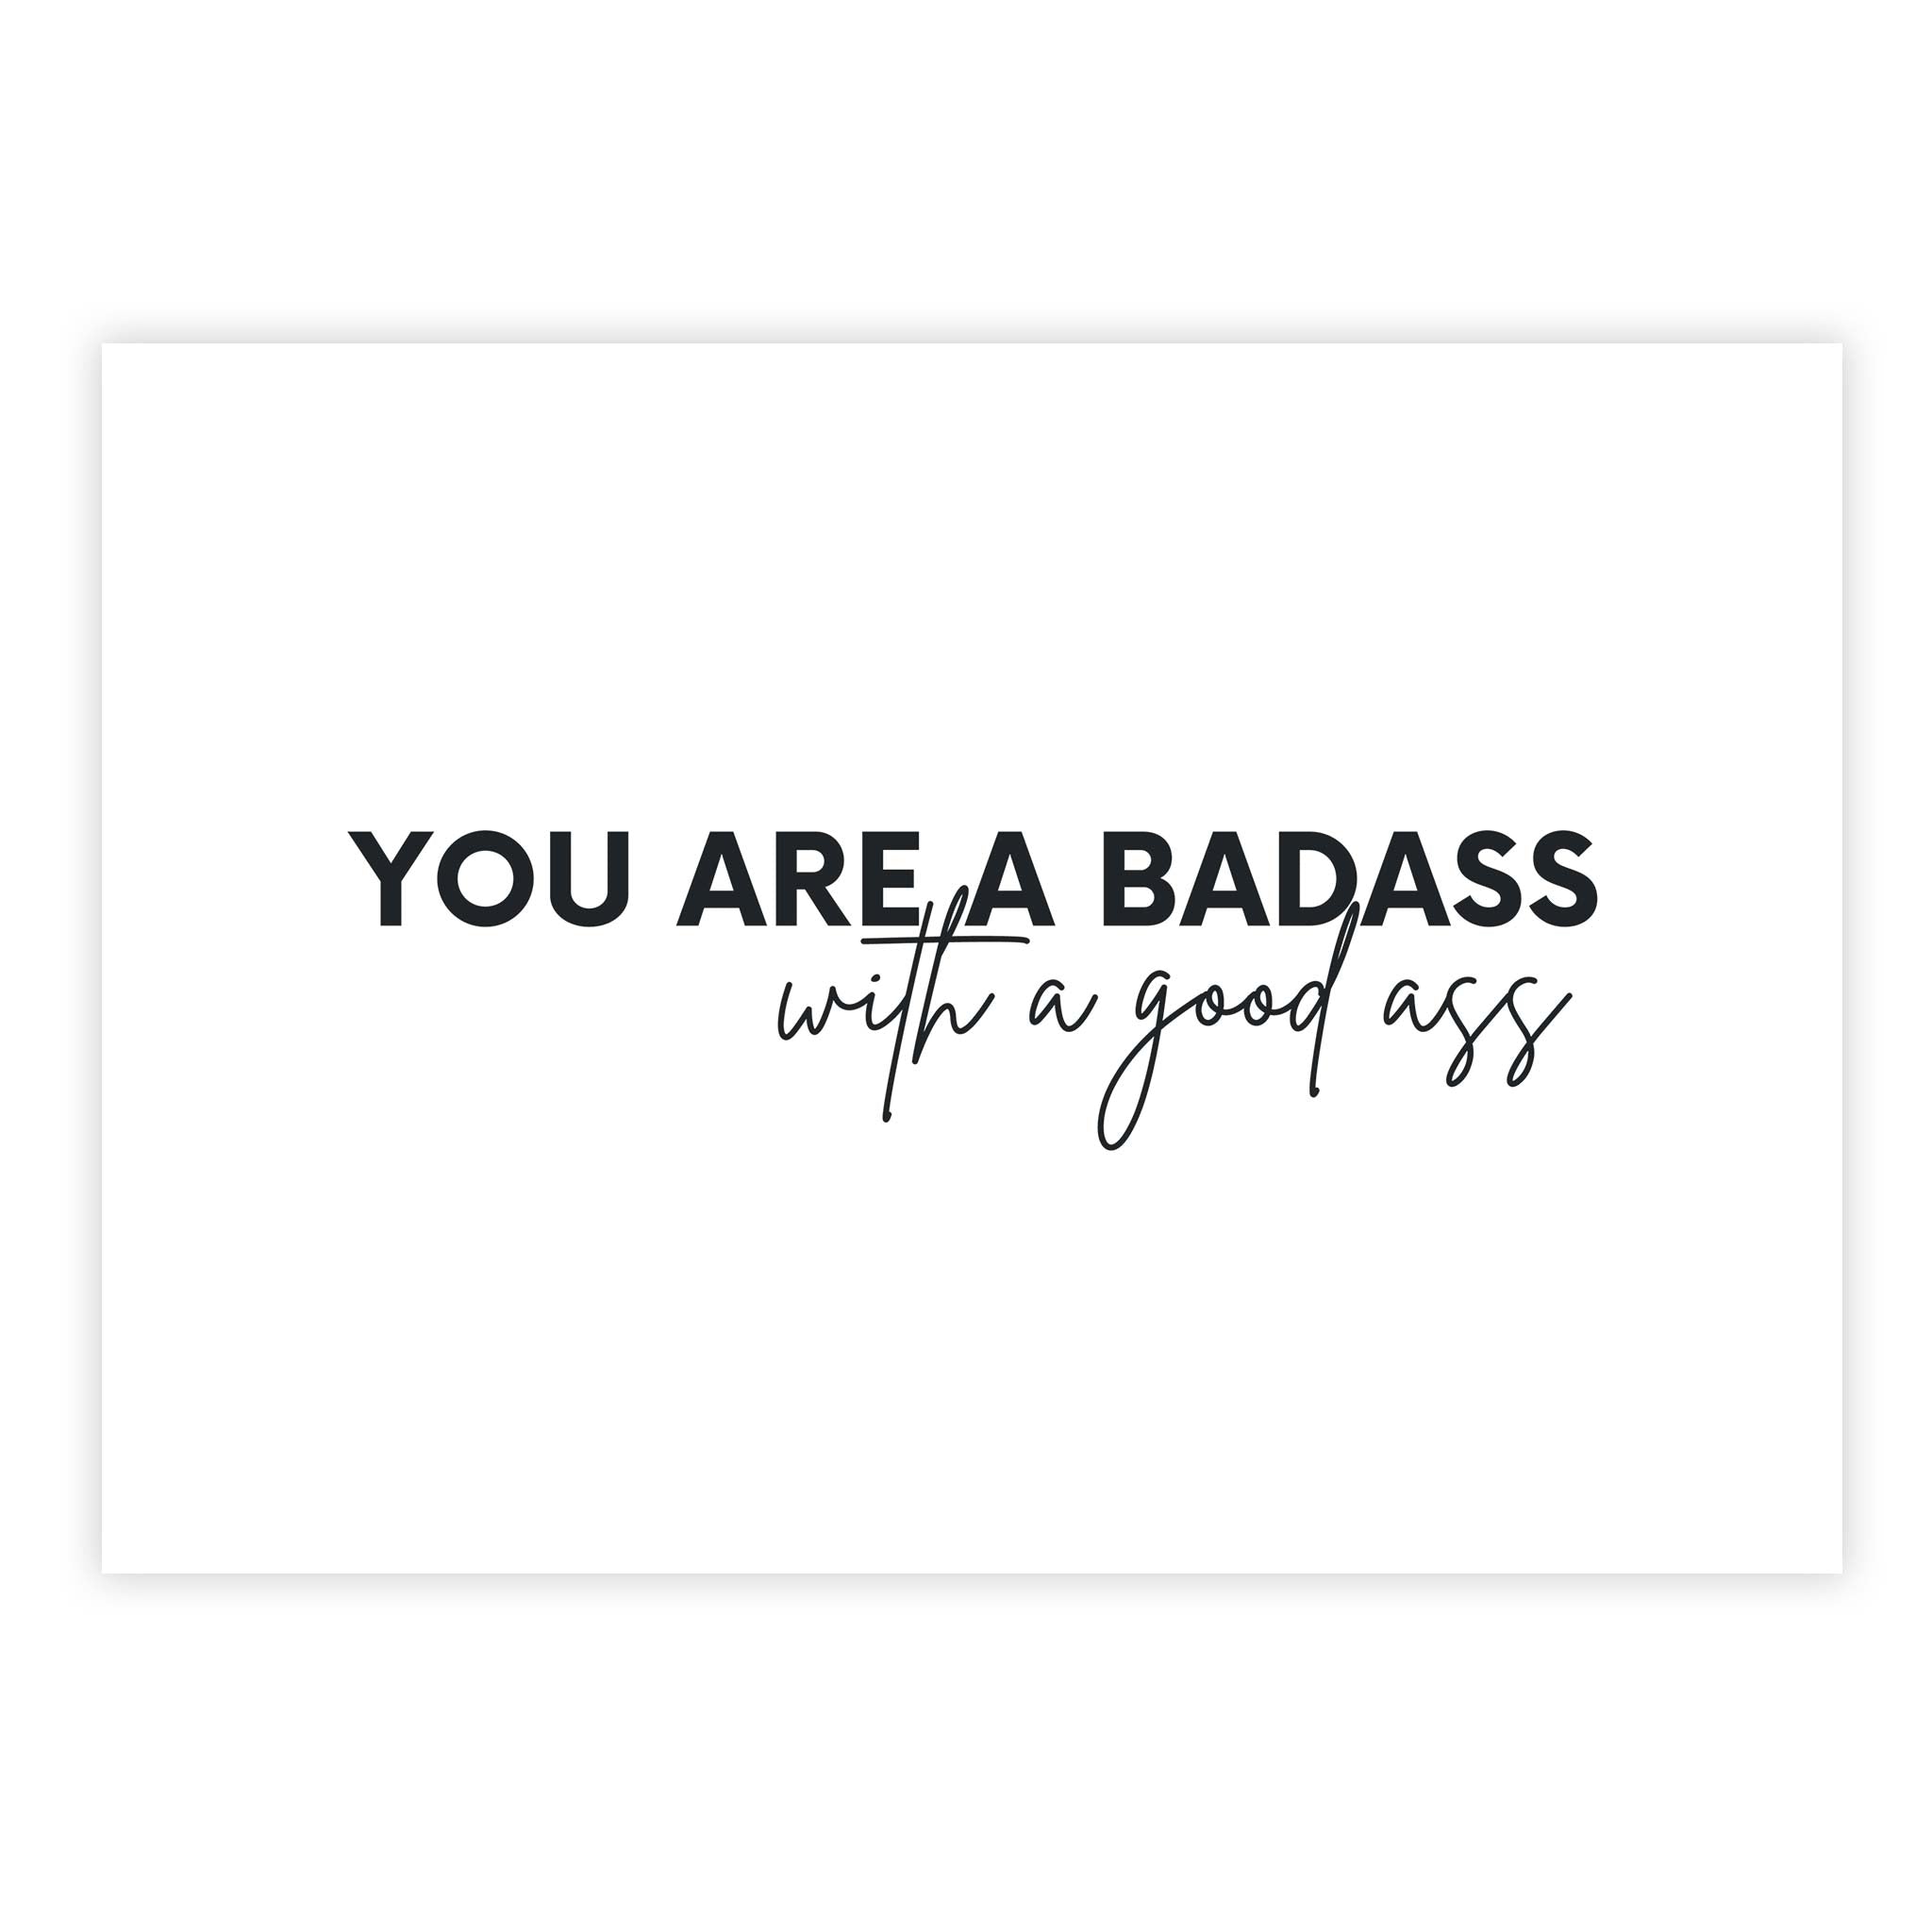 You are a badass with a good ass